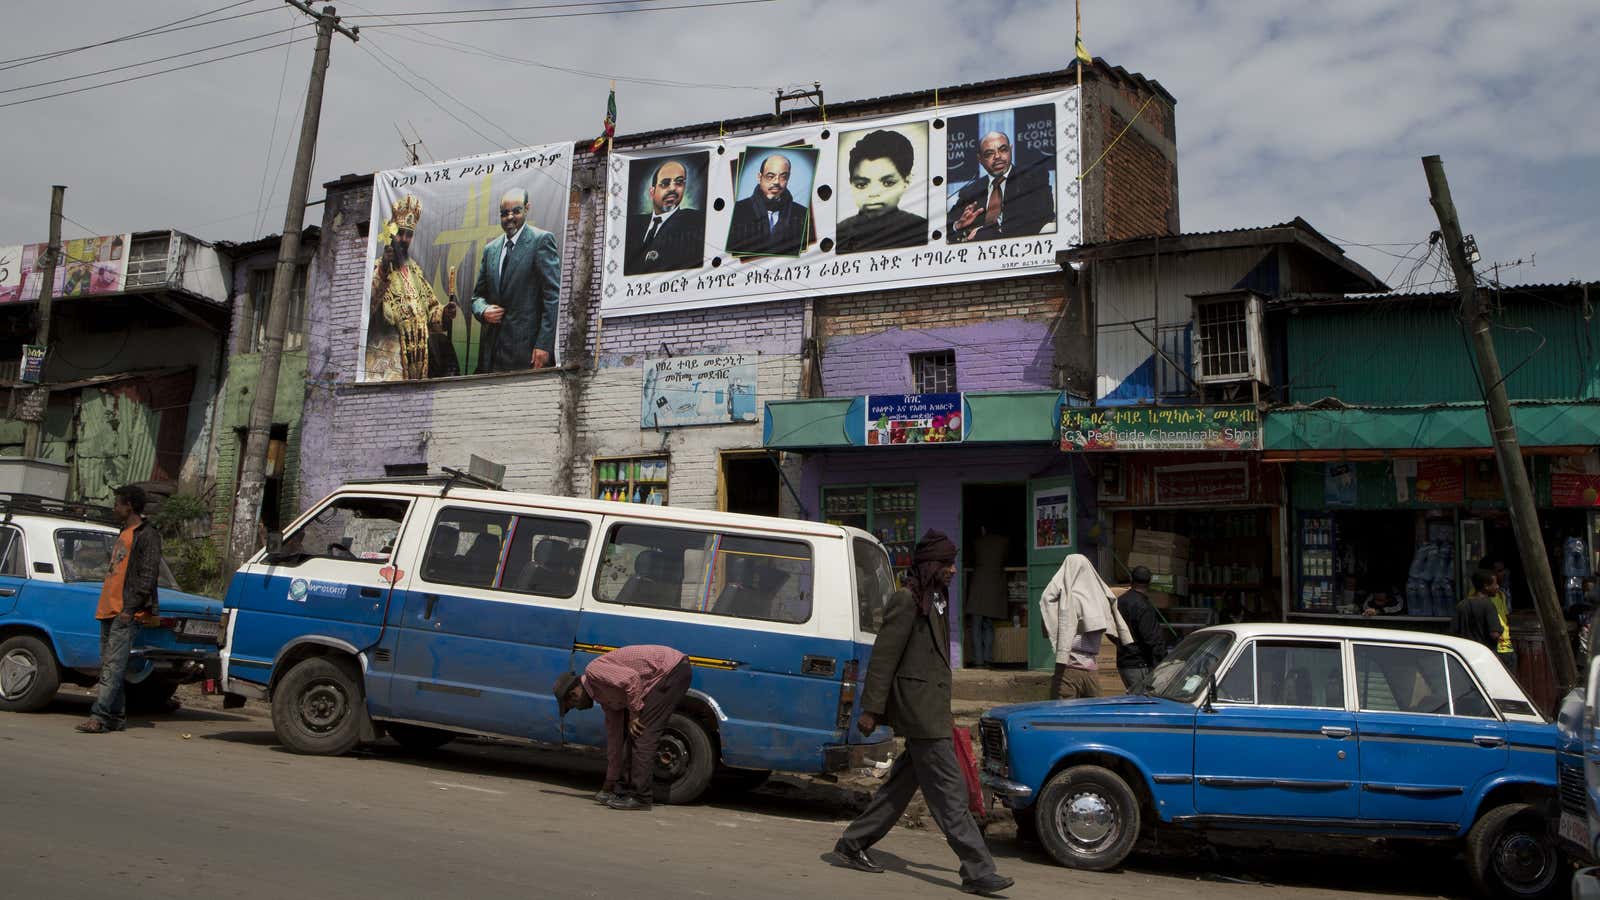 Taxis and a public transport minibus sit parked along an Addis Ababa street in 2012.